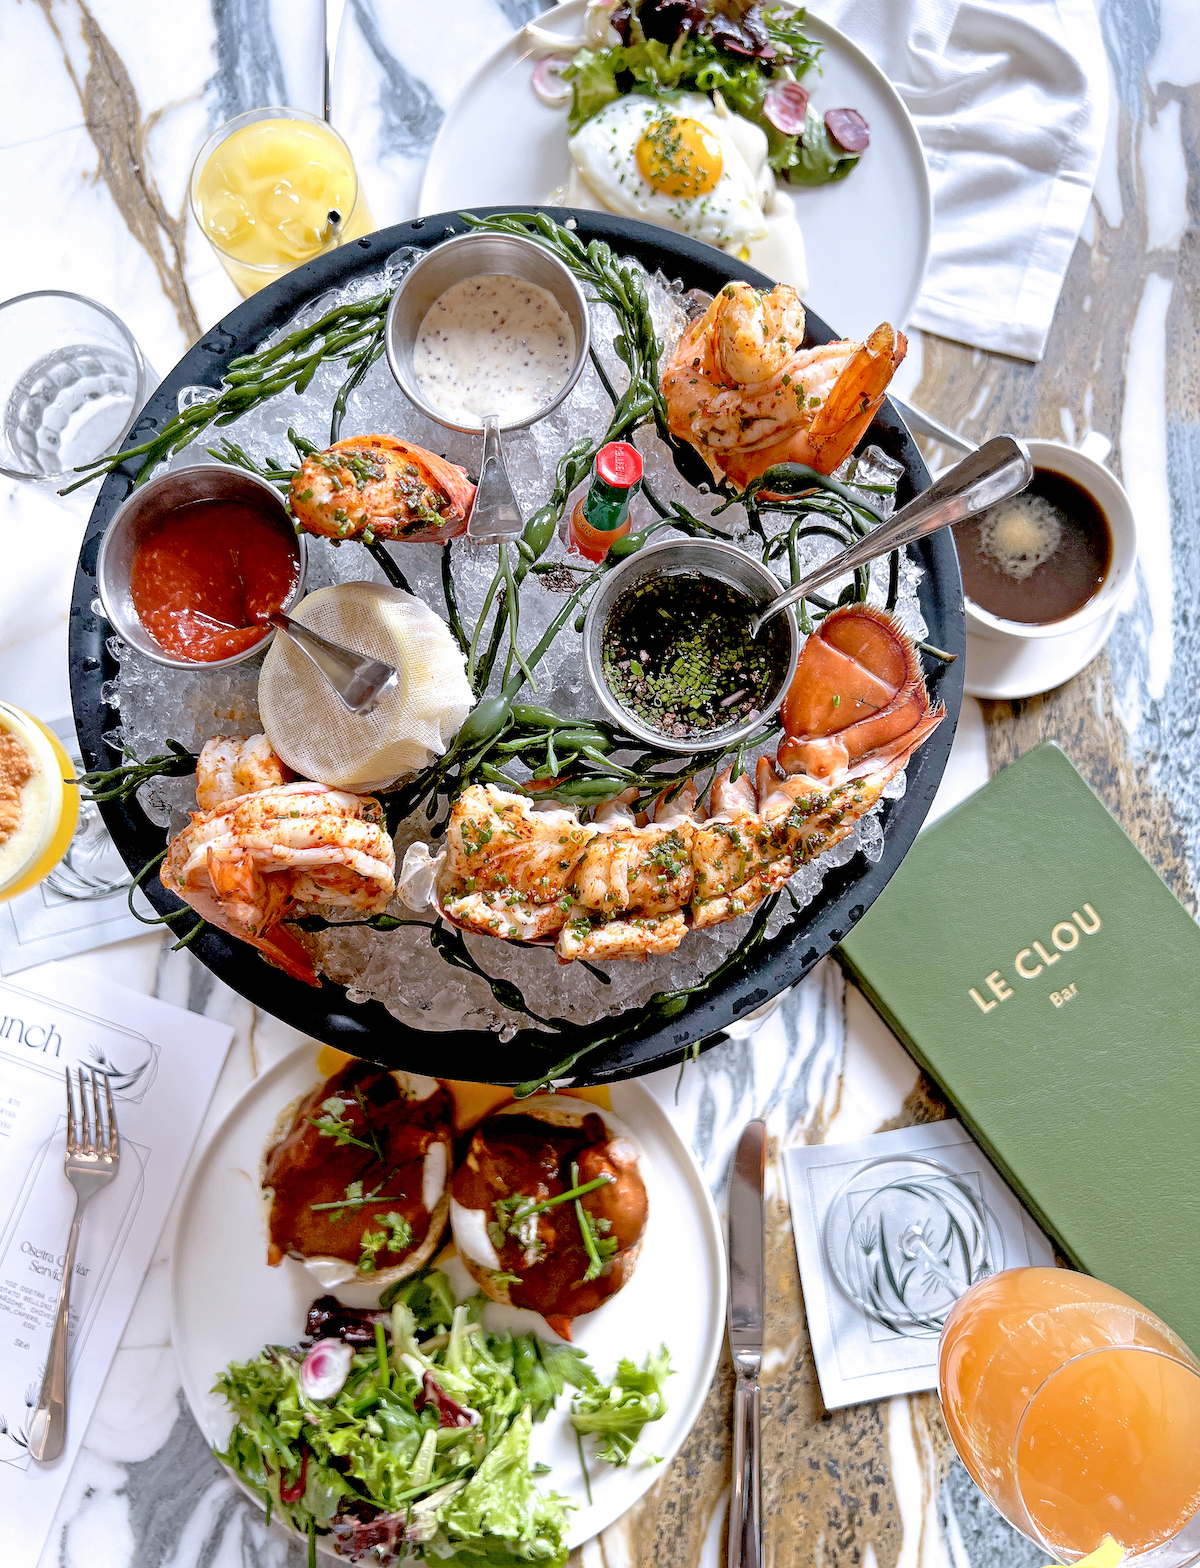 Le Clou, a new Nick Stefanelli restaurant, goes glam with shellfish plateaus and brasserie fare. Photograph courtesy of Le Clou